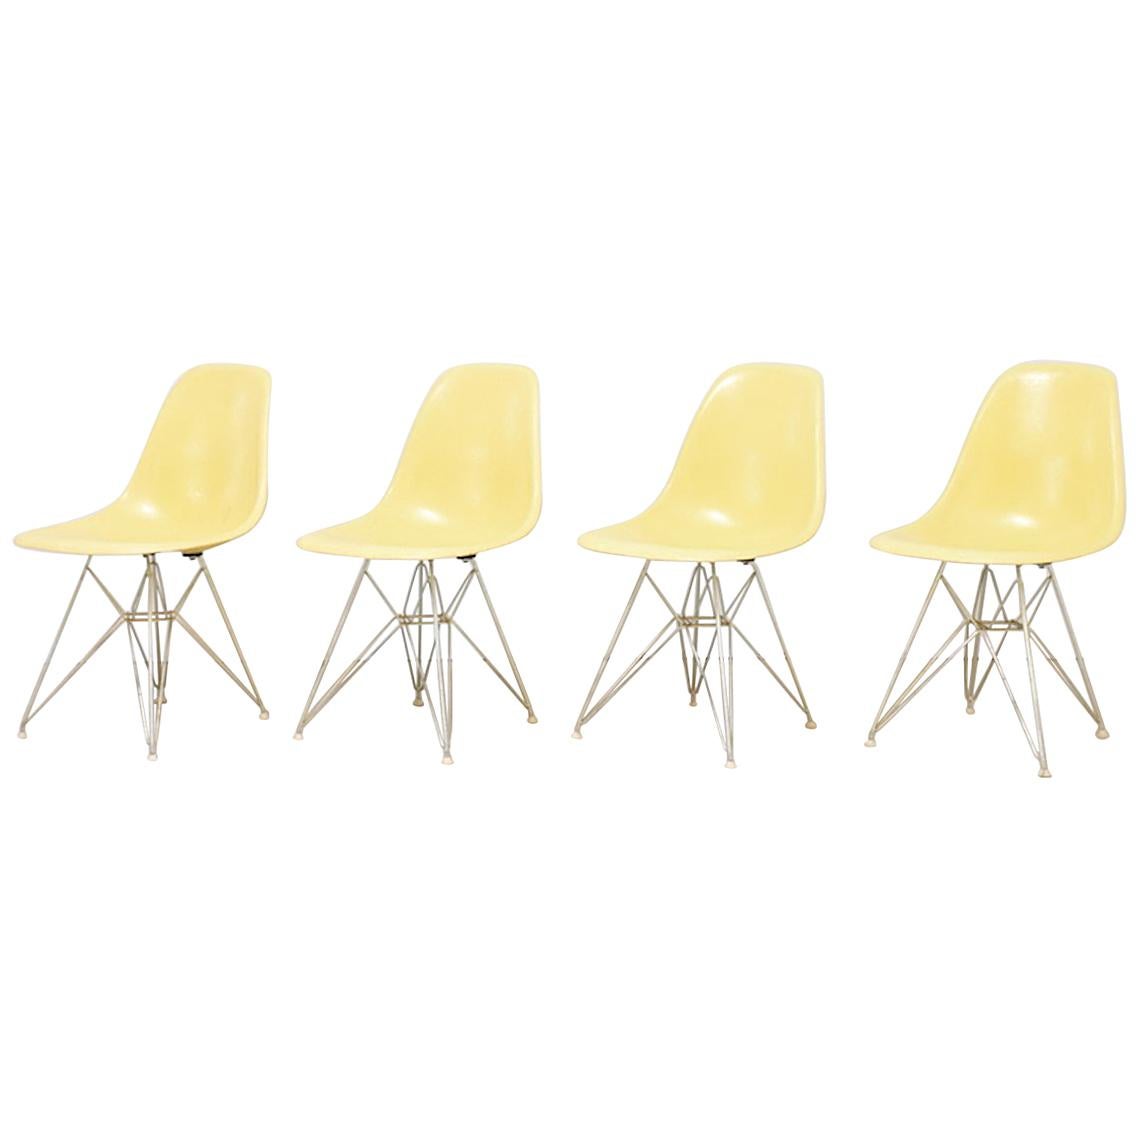 Charles & Ray Eames Dining Chairs Set of 4, Early Edition in Zenith Eiffel Legs For Sale